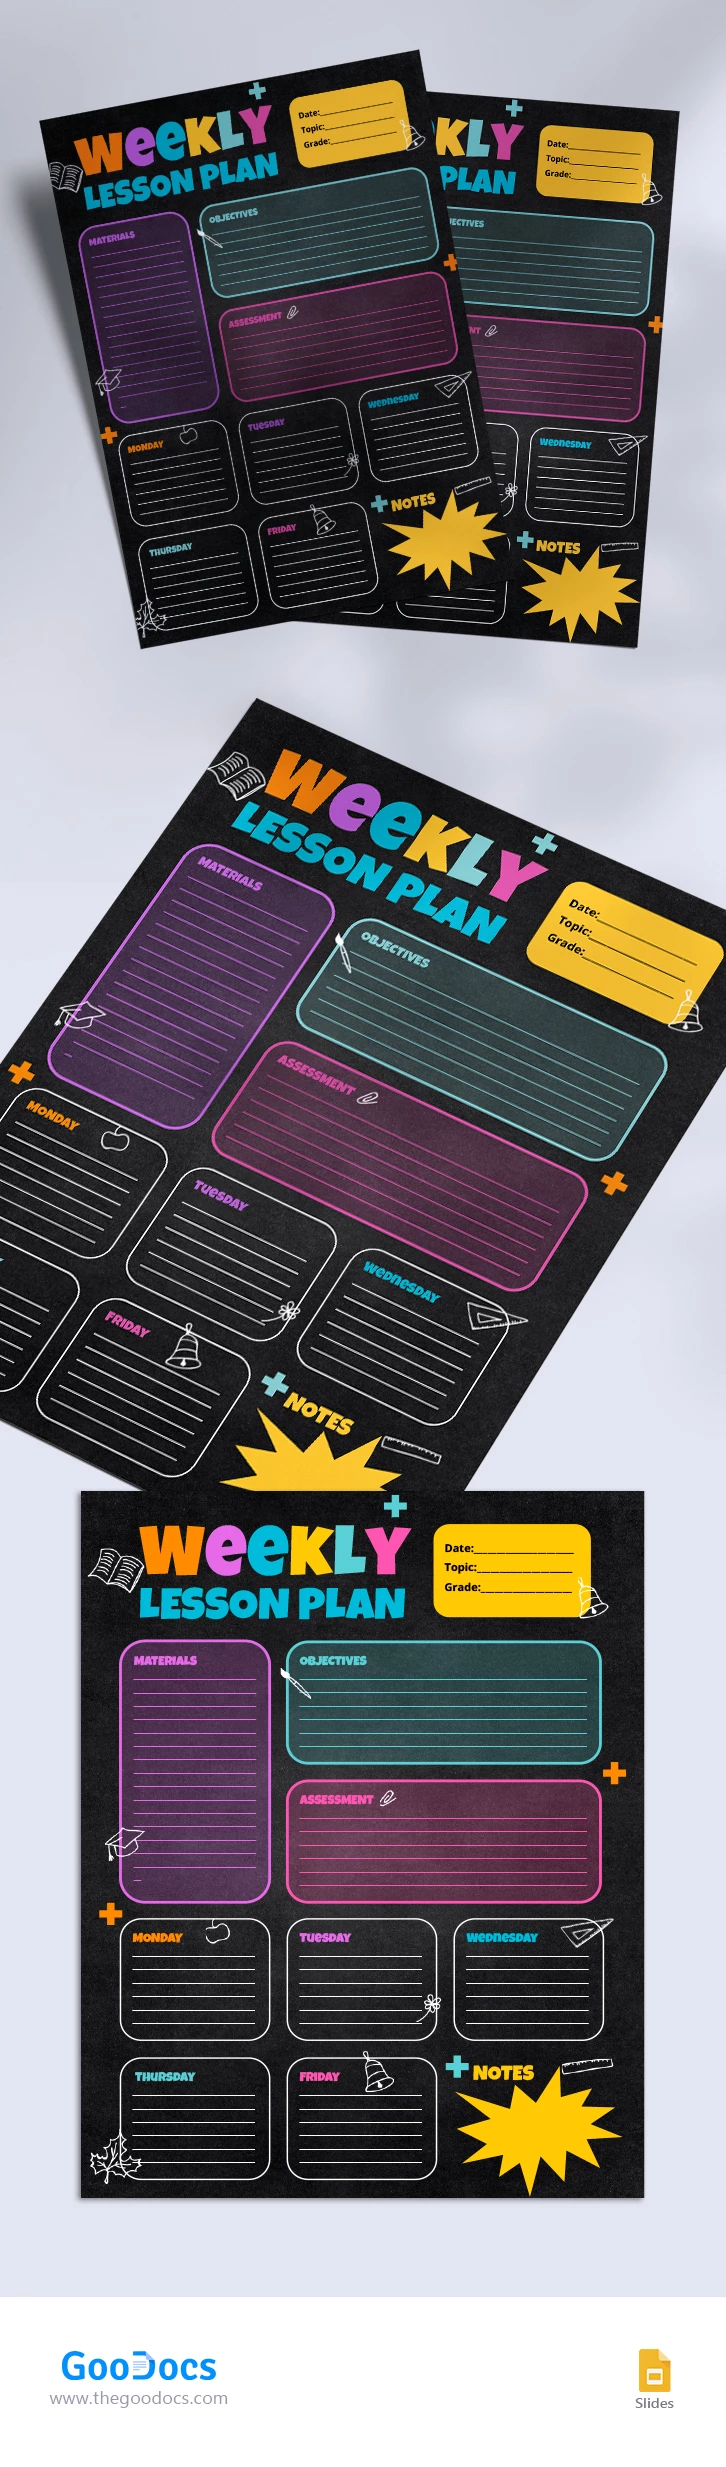 Chalkboard Weekly Lesson Plan - free Google Docs Template - 10067737